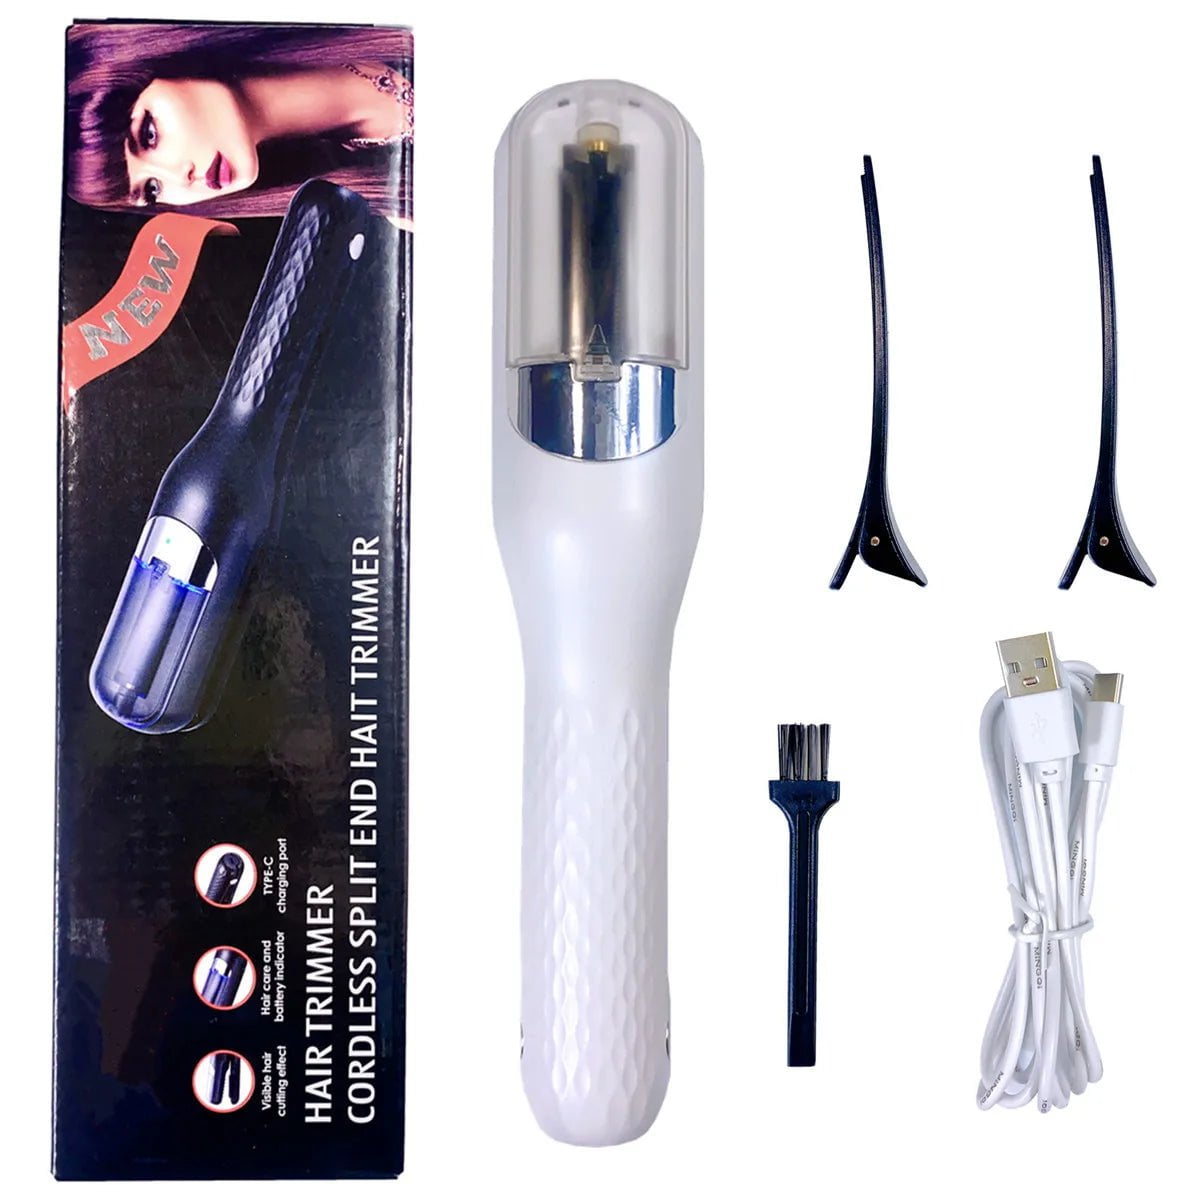 Split Hair Trimmer Hair Split Ends Trimmer Remover Damaged Hair Repair Hair Care Treatment Rechargeable Cordless Hair Cutting white / United States